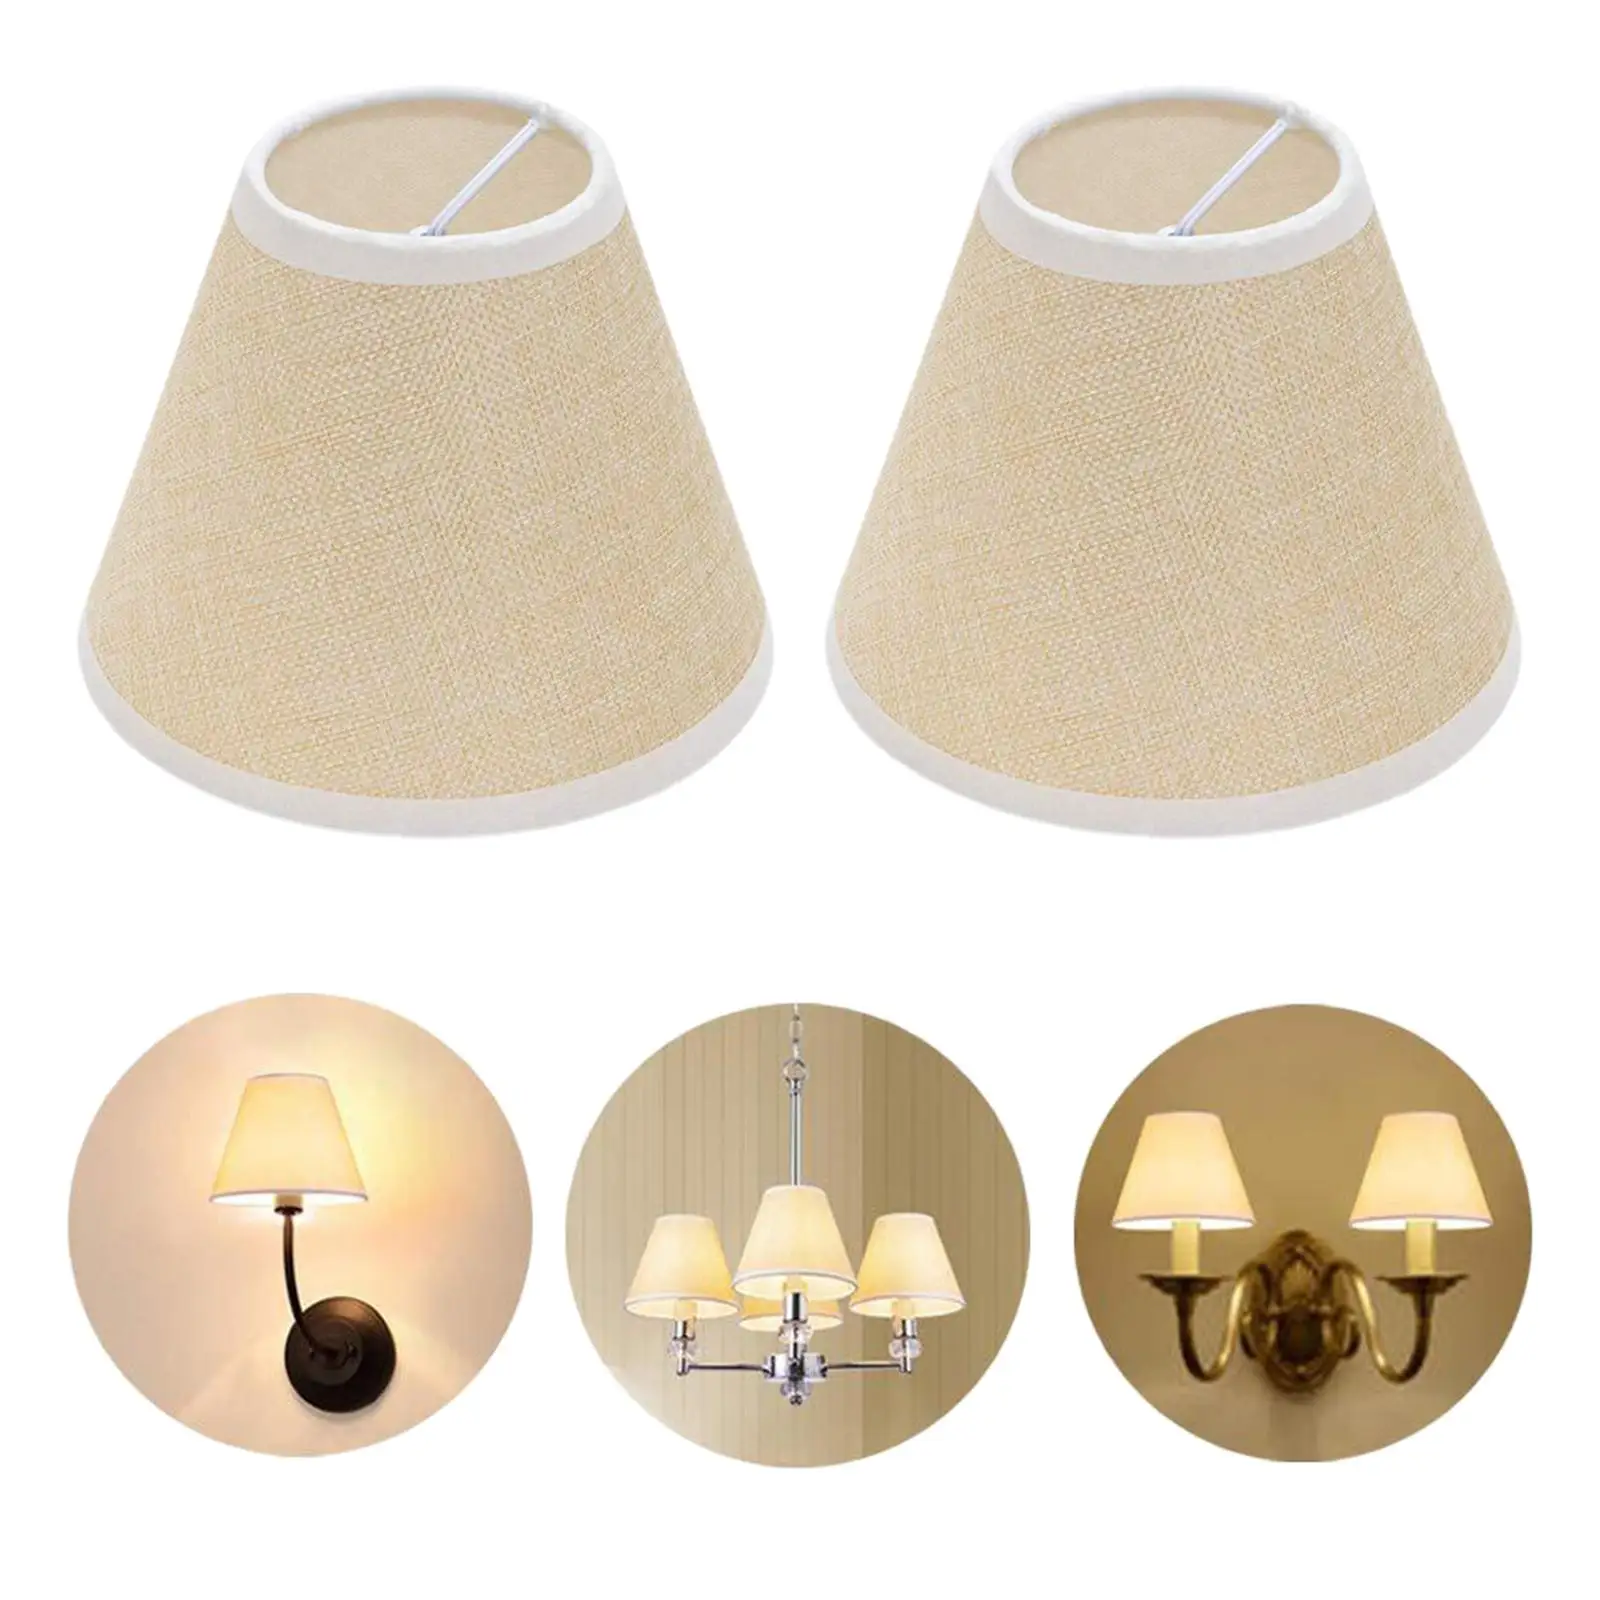 2Pcs Rustic Lamp Shade Lamp Cover Cloth Clip On Decorative Lampshade for Livingroom Accessories Hanging Light Bedroom